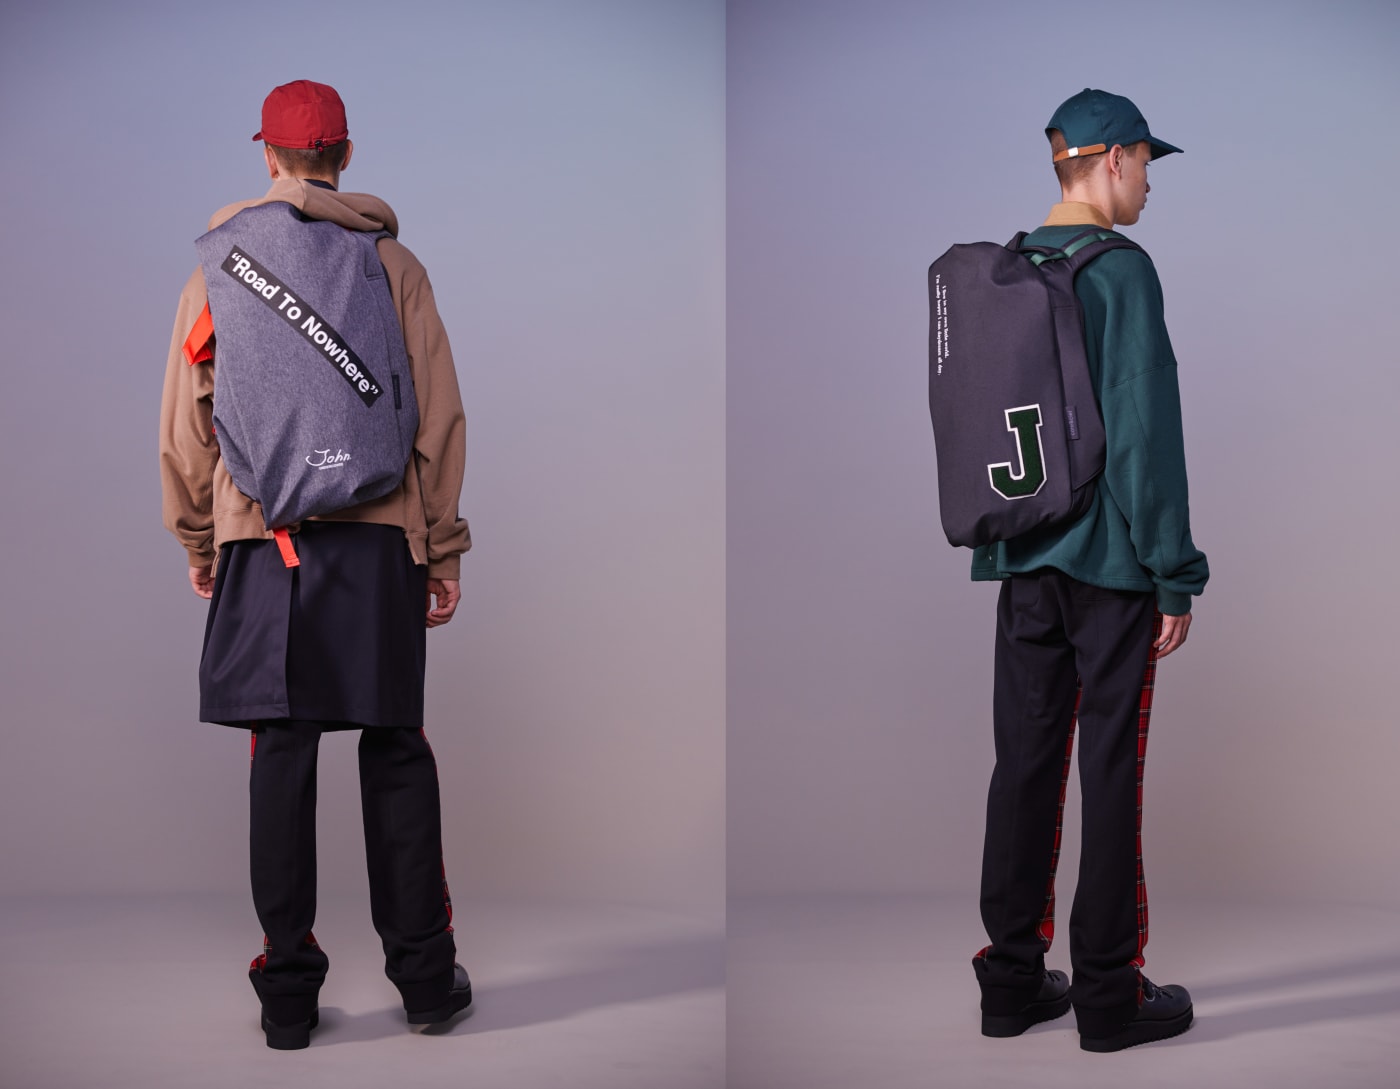 côte&ciel + JohnUNDERCOVER Link up for an Exclusive Isar Backpack 